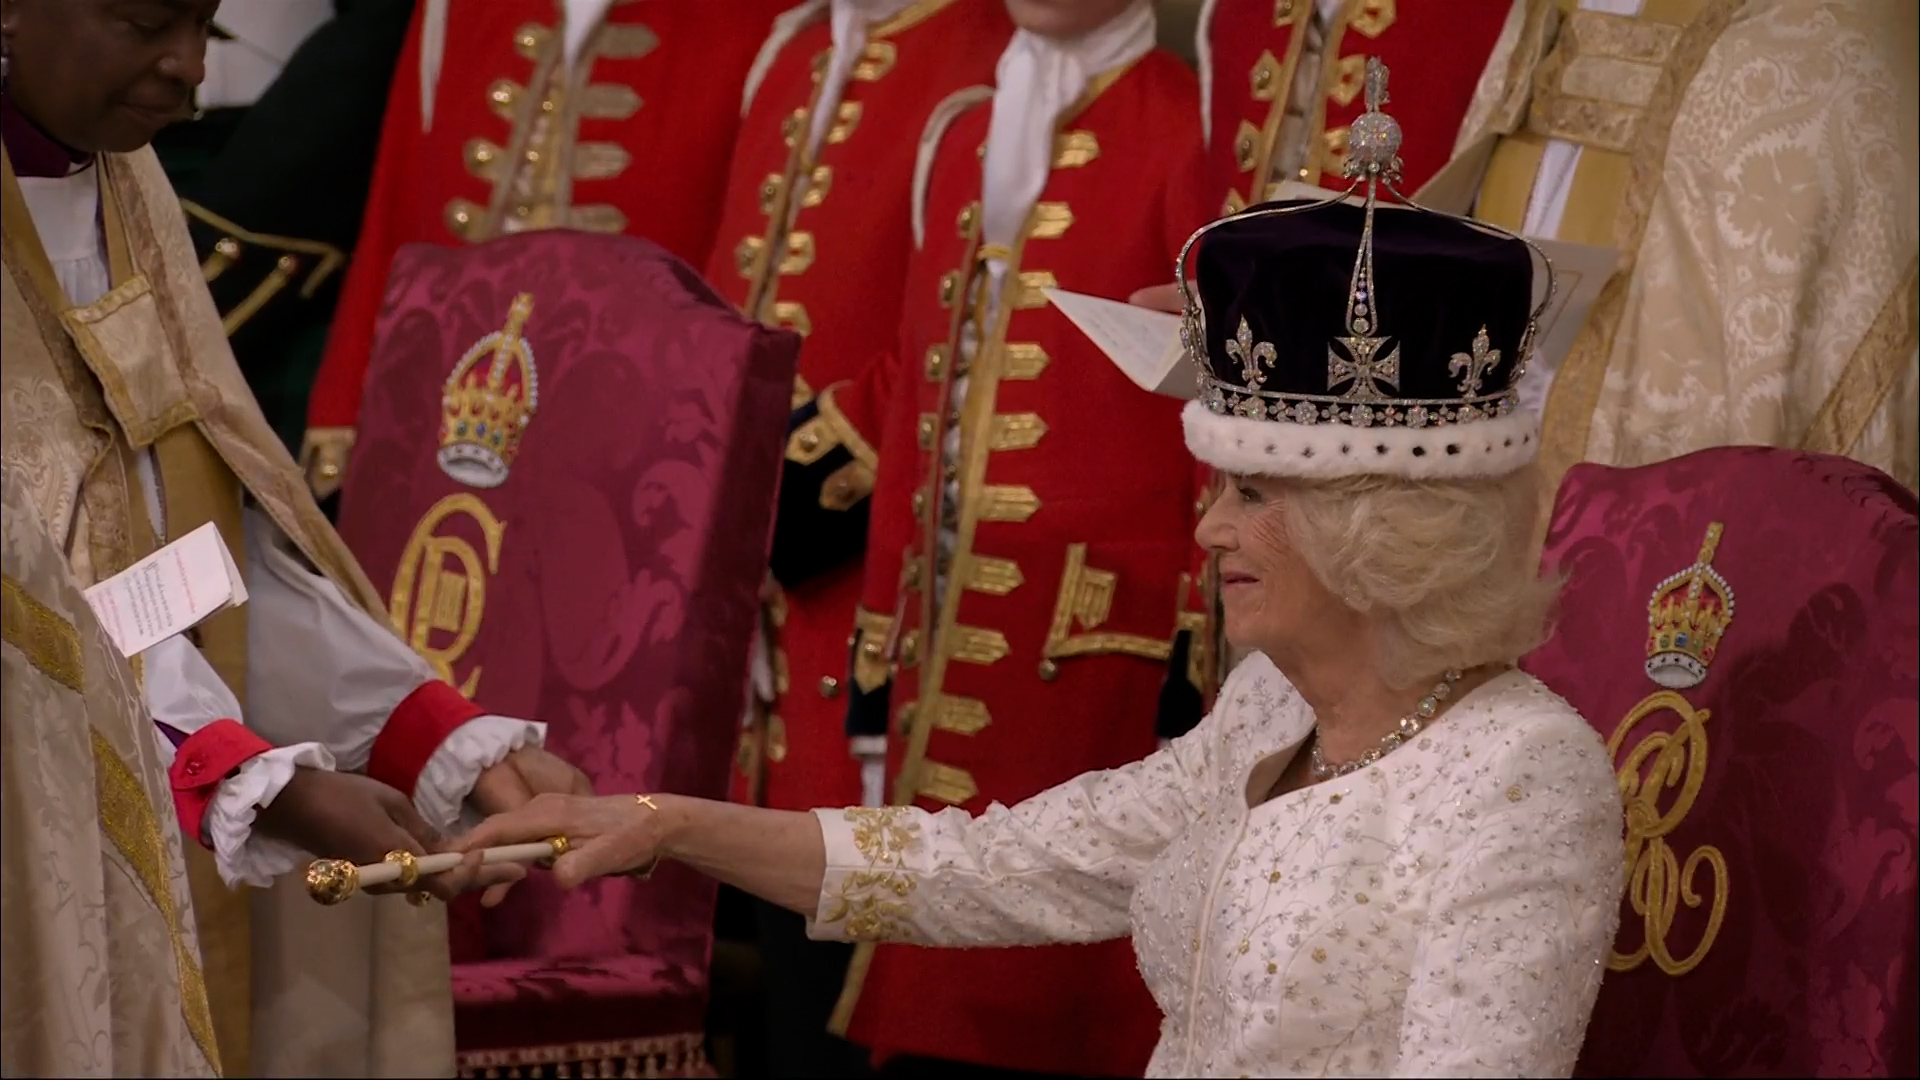 The Romantic Hidden Detail Everyone Missed on Camilla's Coronation